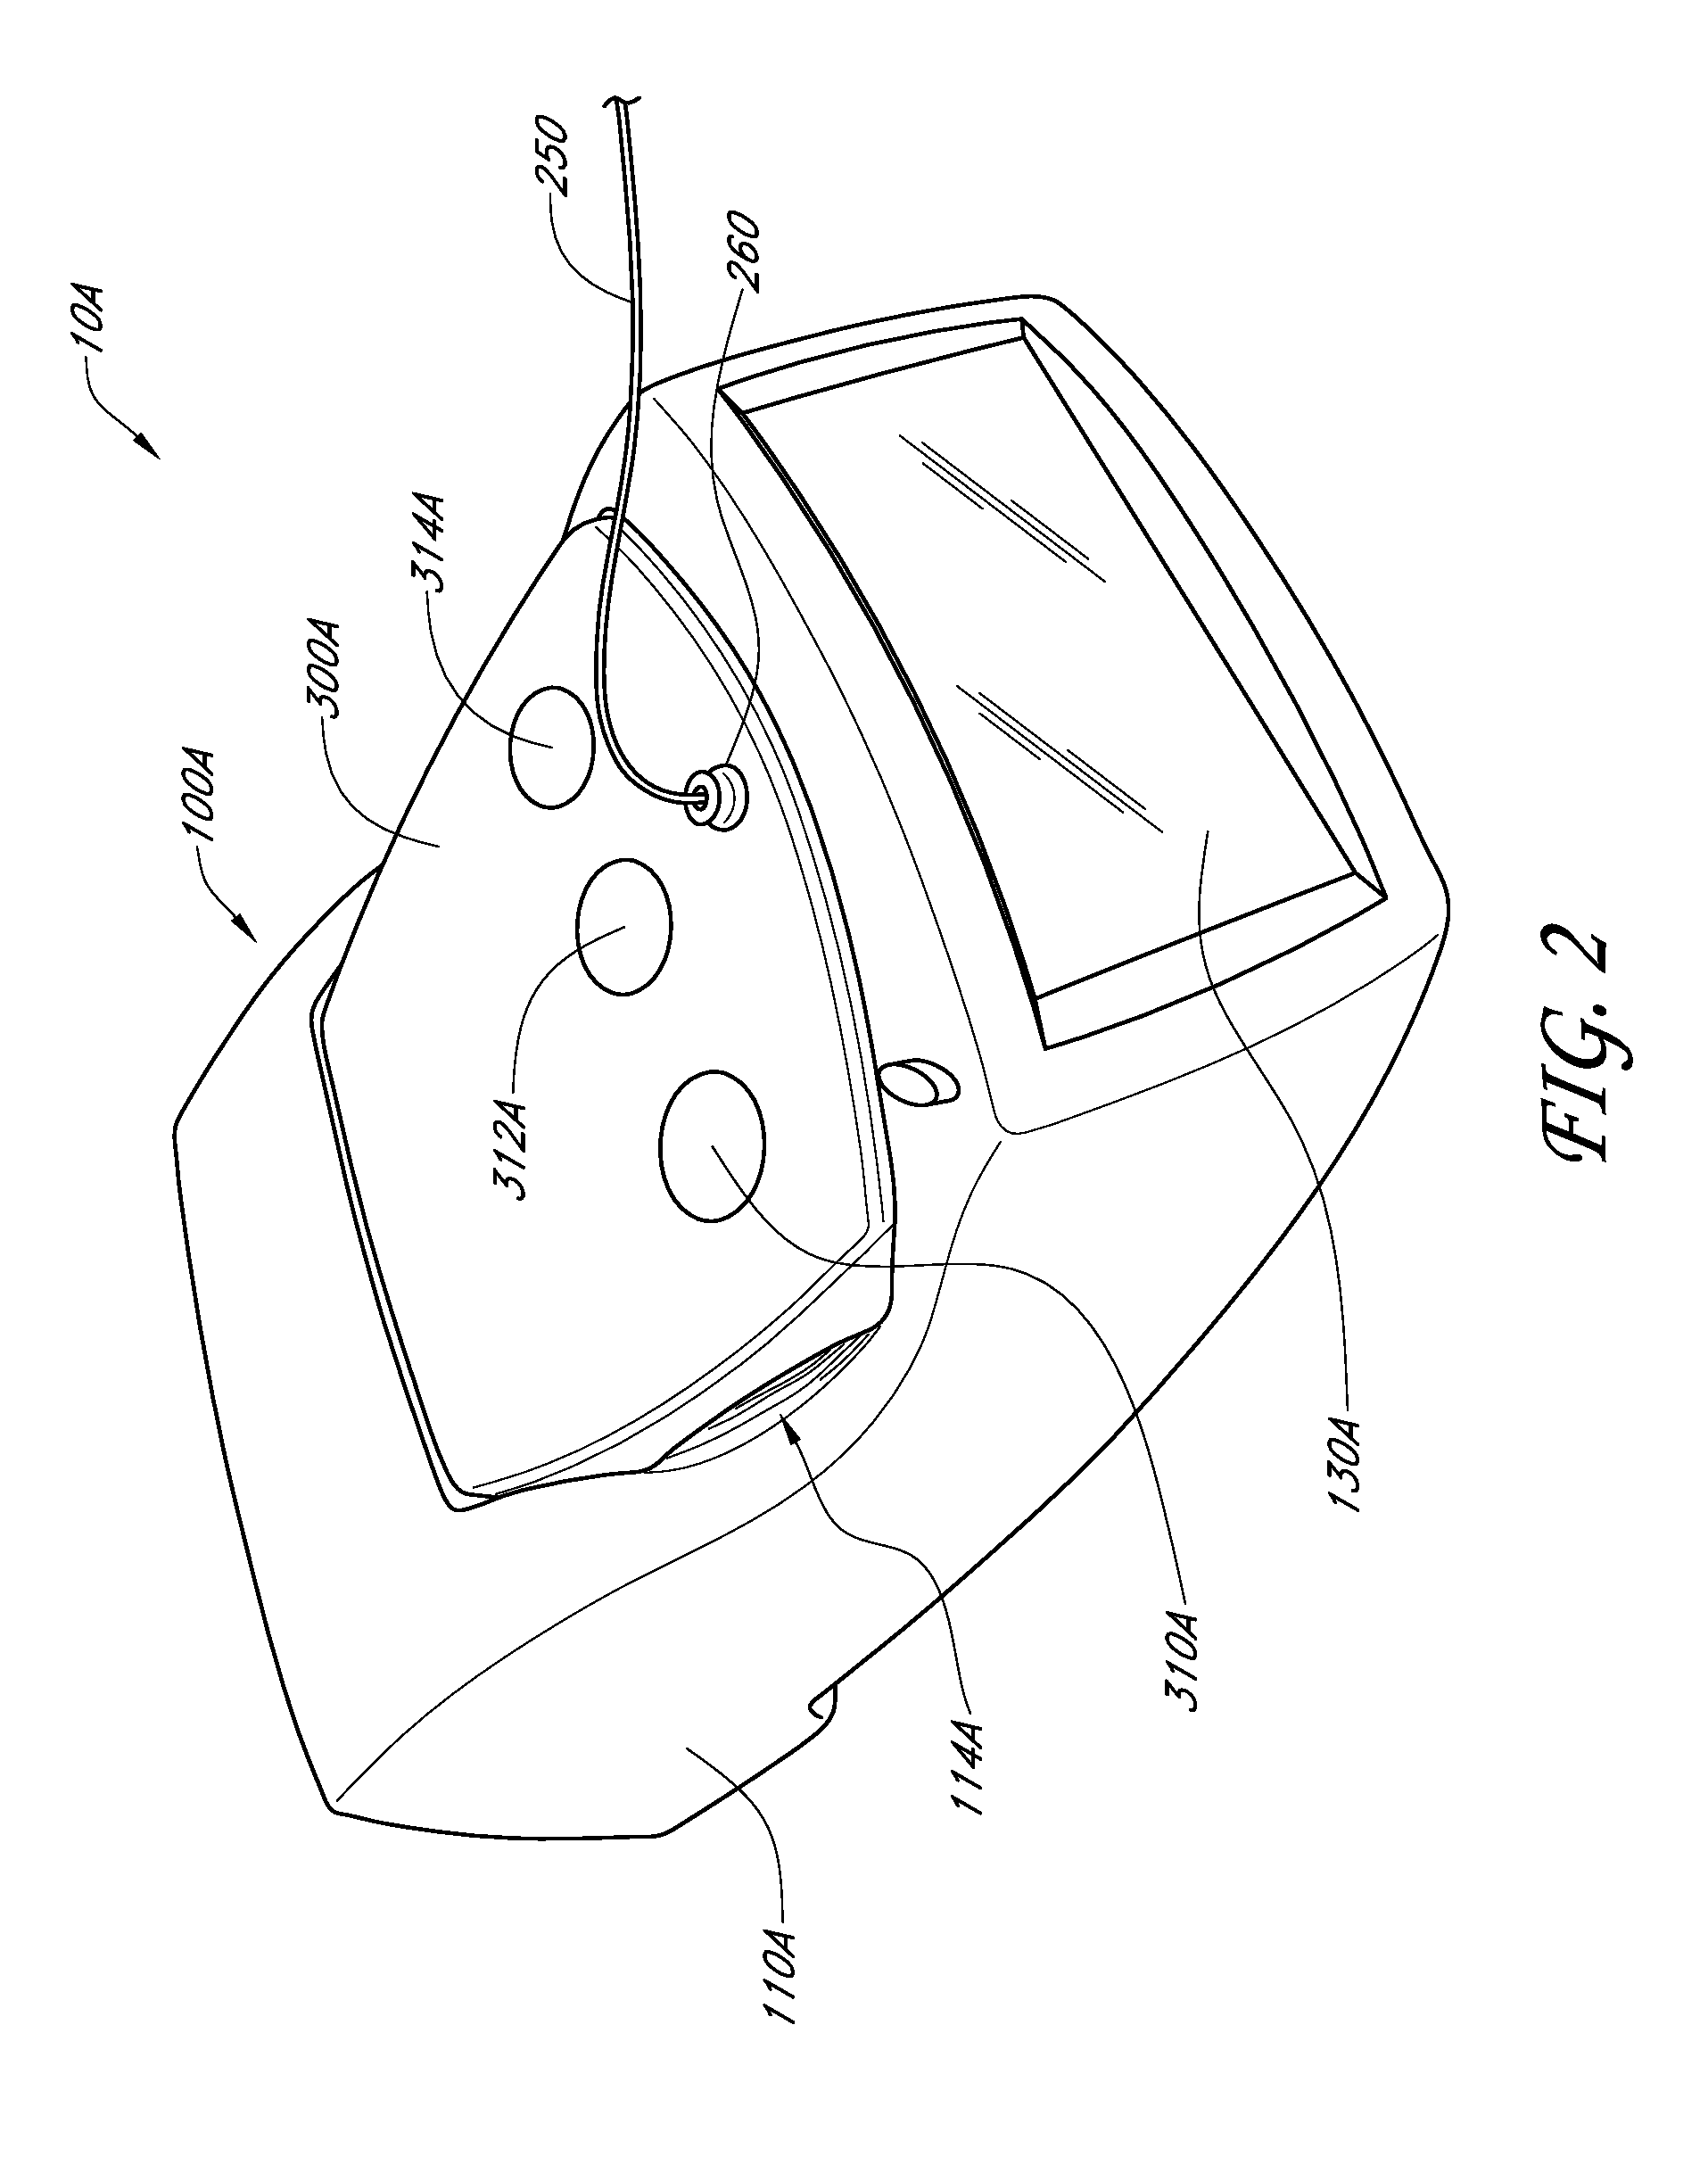 Imaging-guided anesthesia injection systems and methods